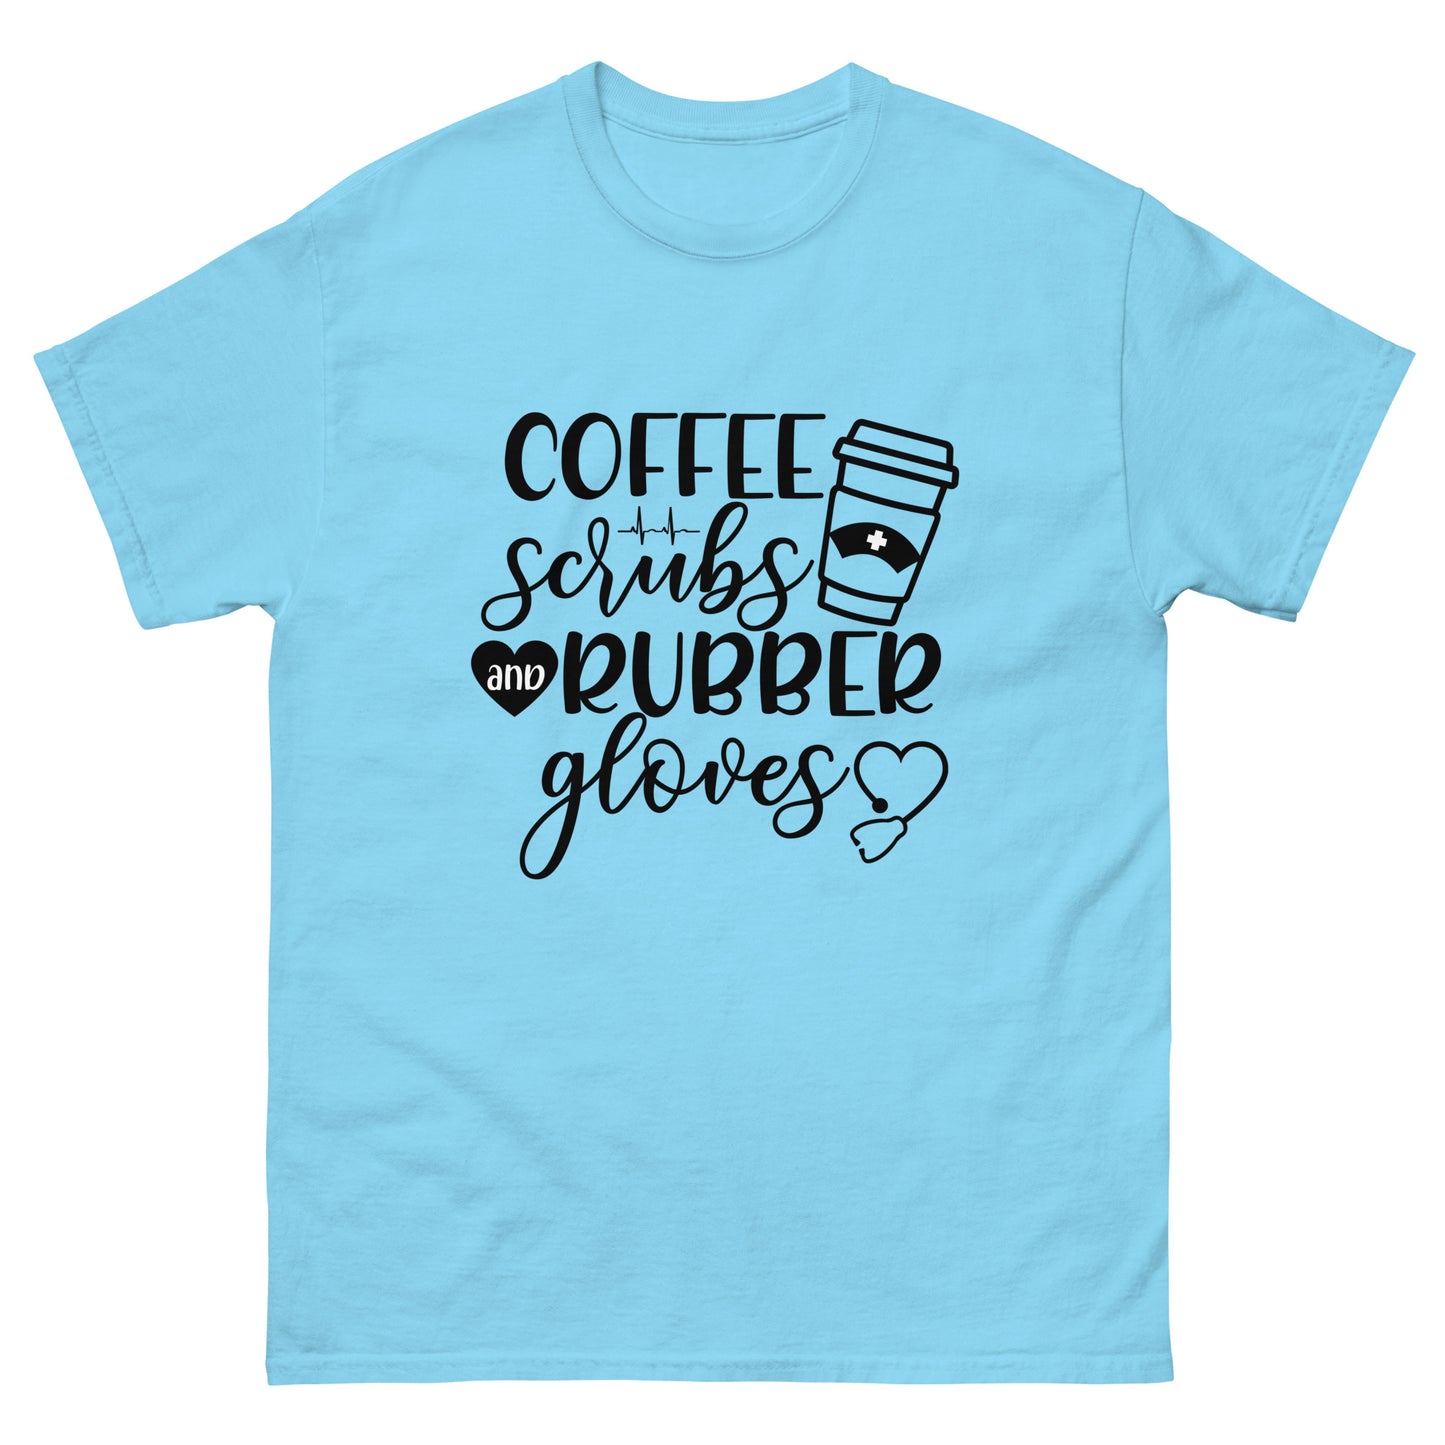 Coffee, Scrubs and Rubber gloves - nursing - classic tee